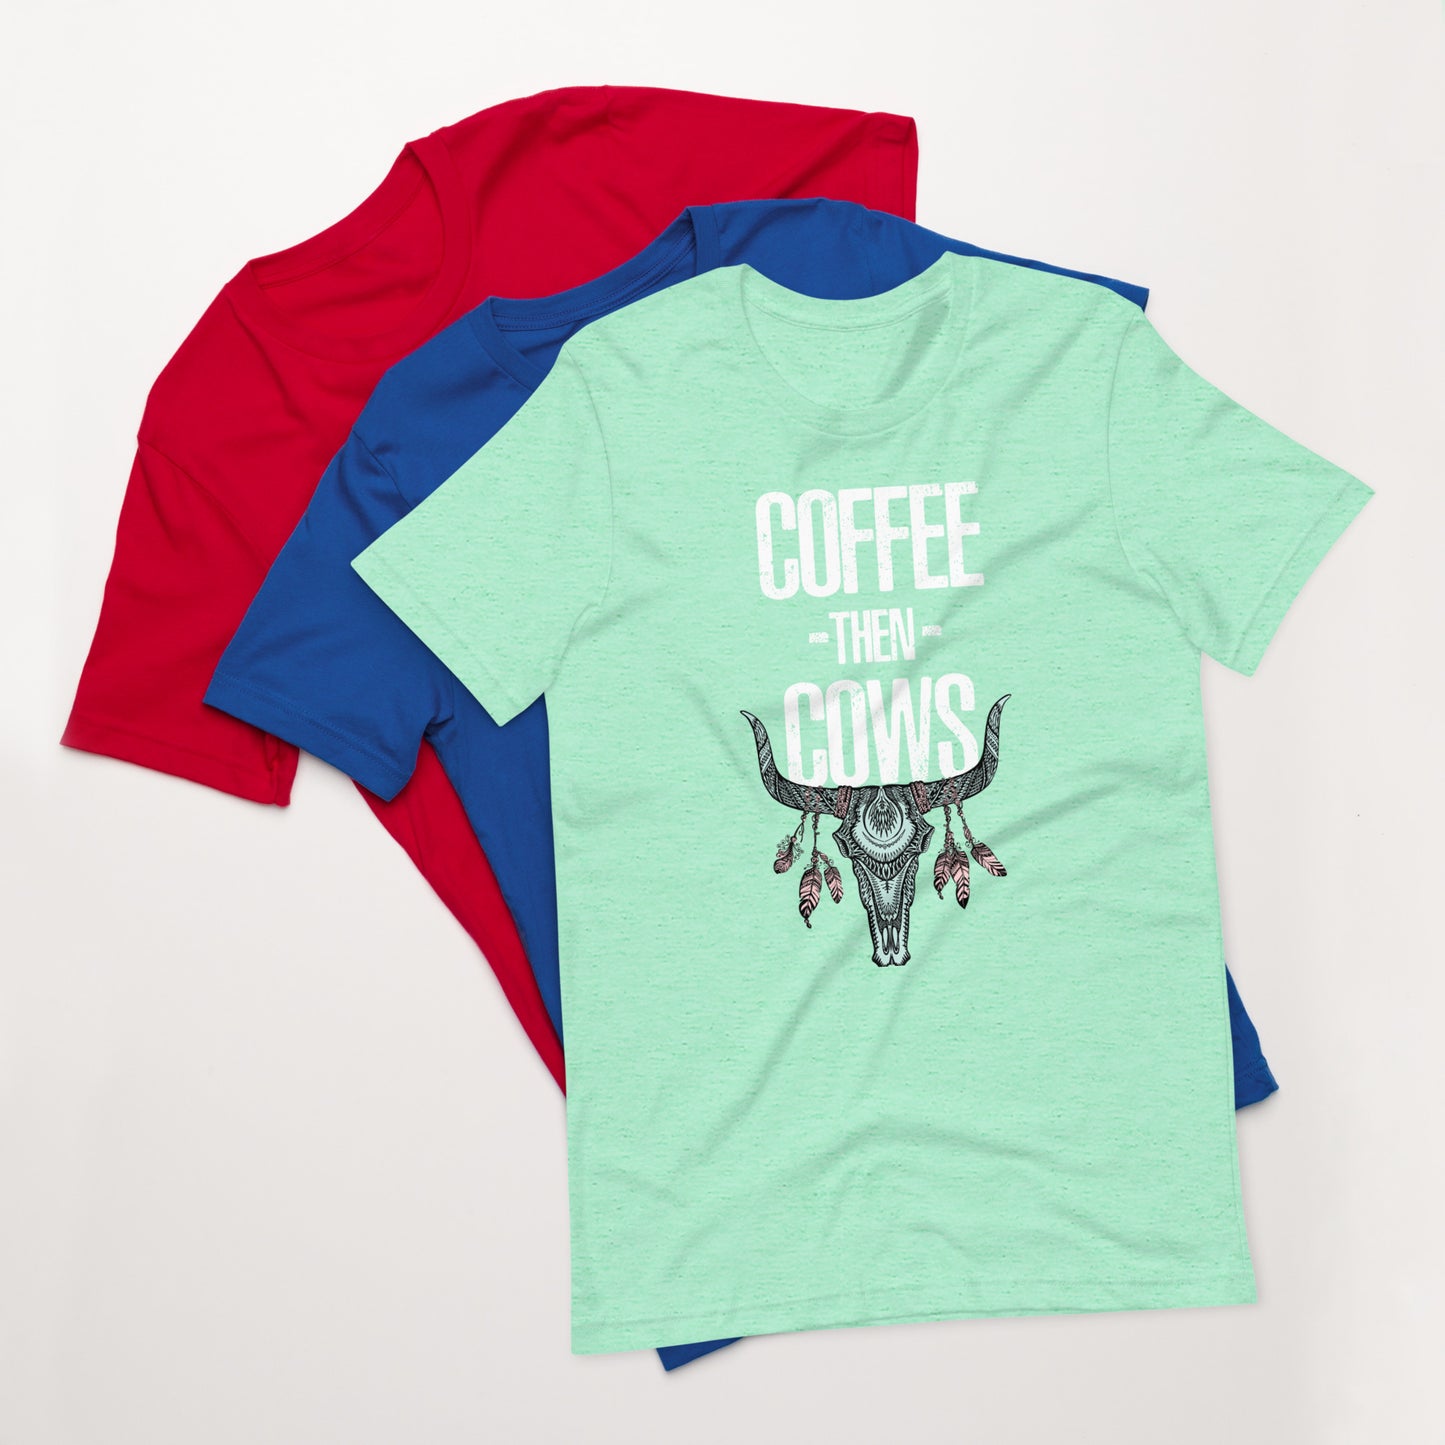 Coffee then Cows Country BoHo Style Unisex t-shirt